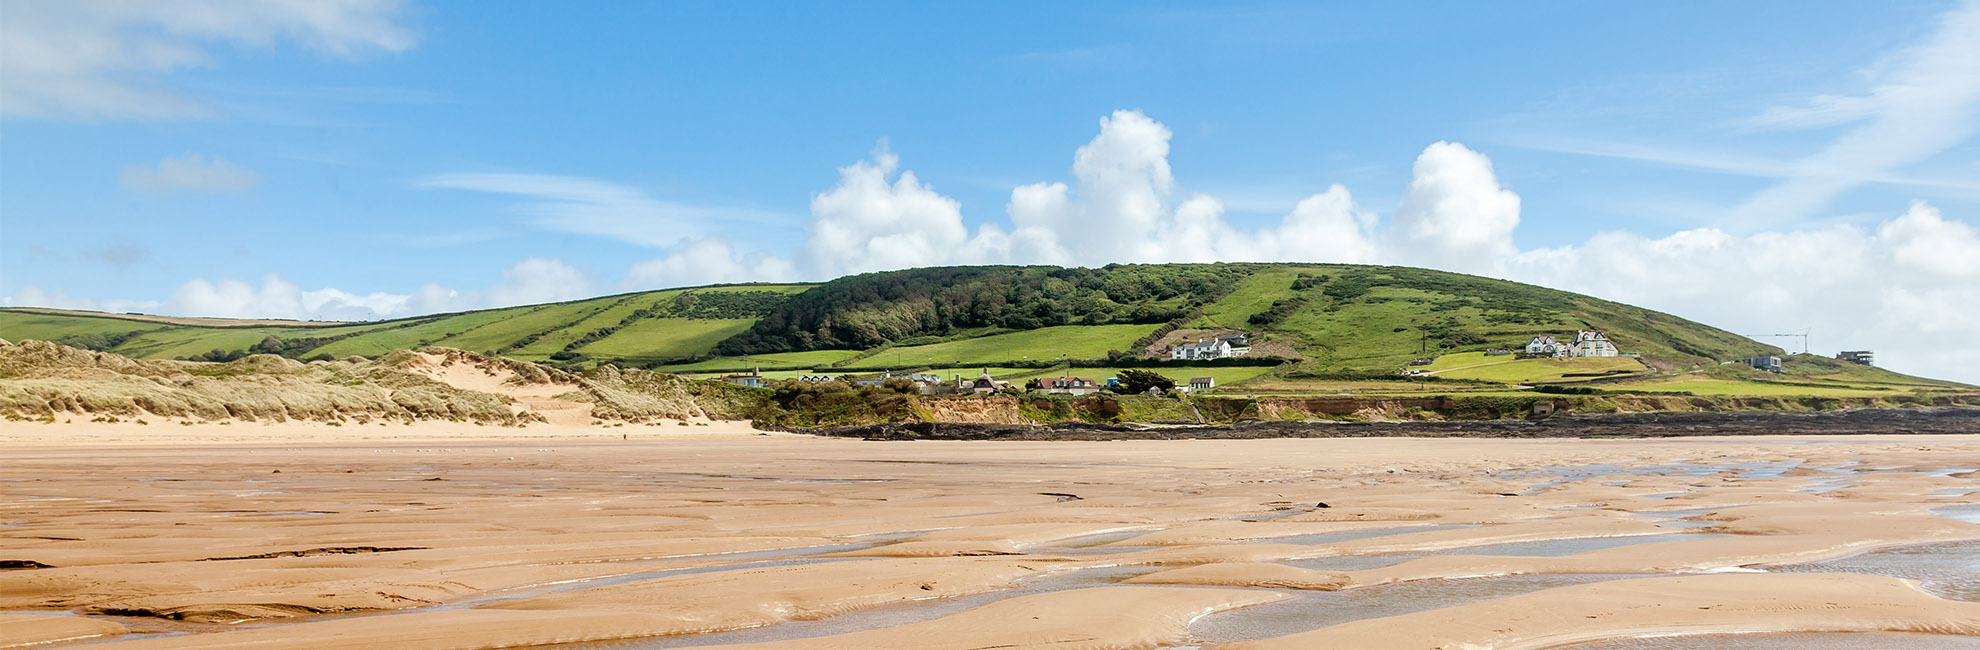 A view over the sand at low tide looking towards the headland at Croyde Bay Beach in Devon